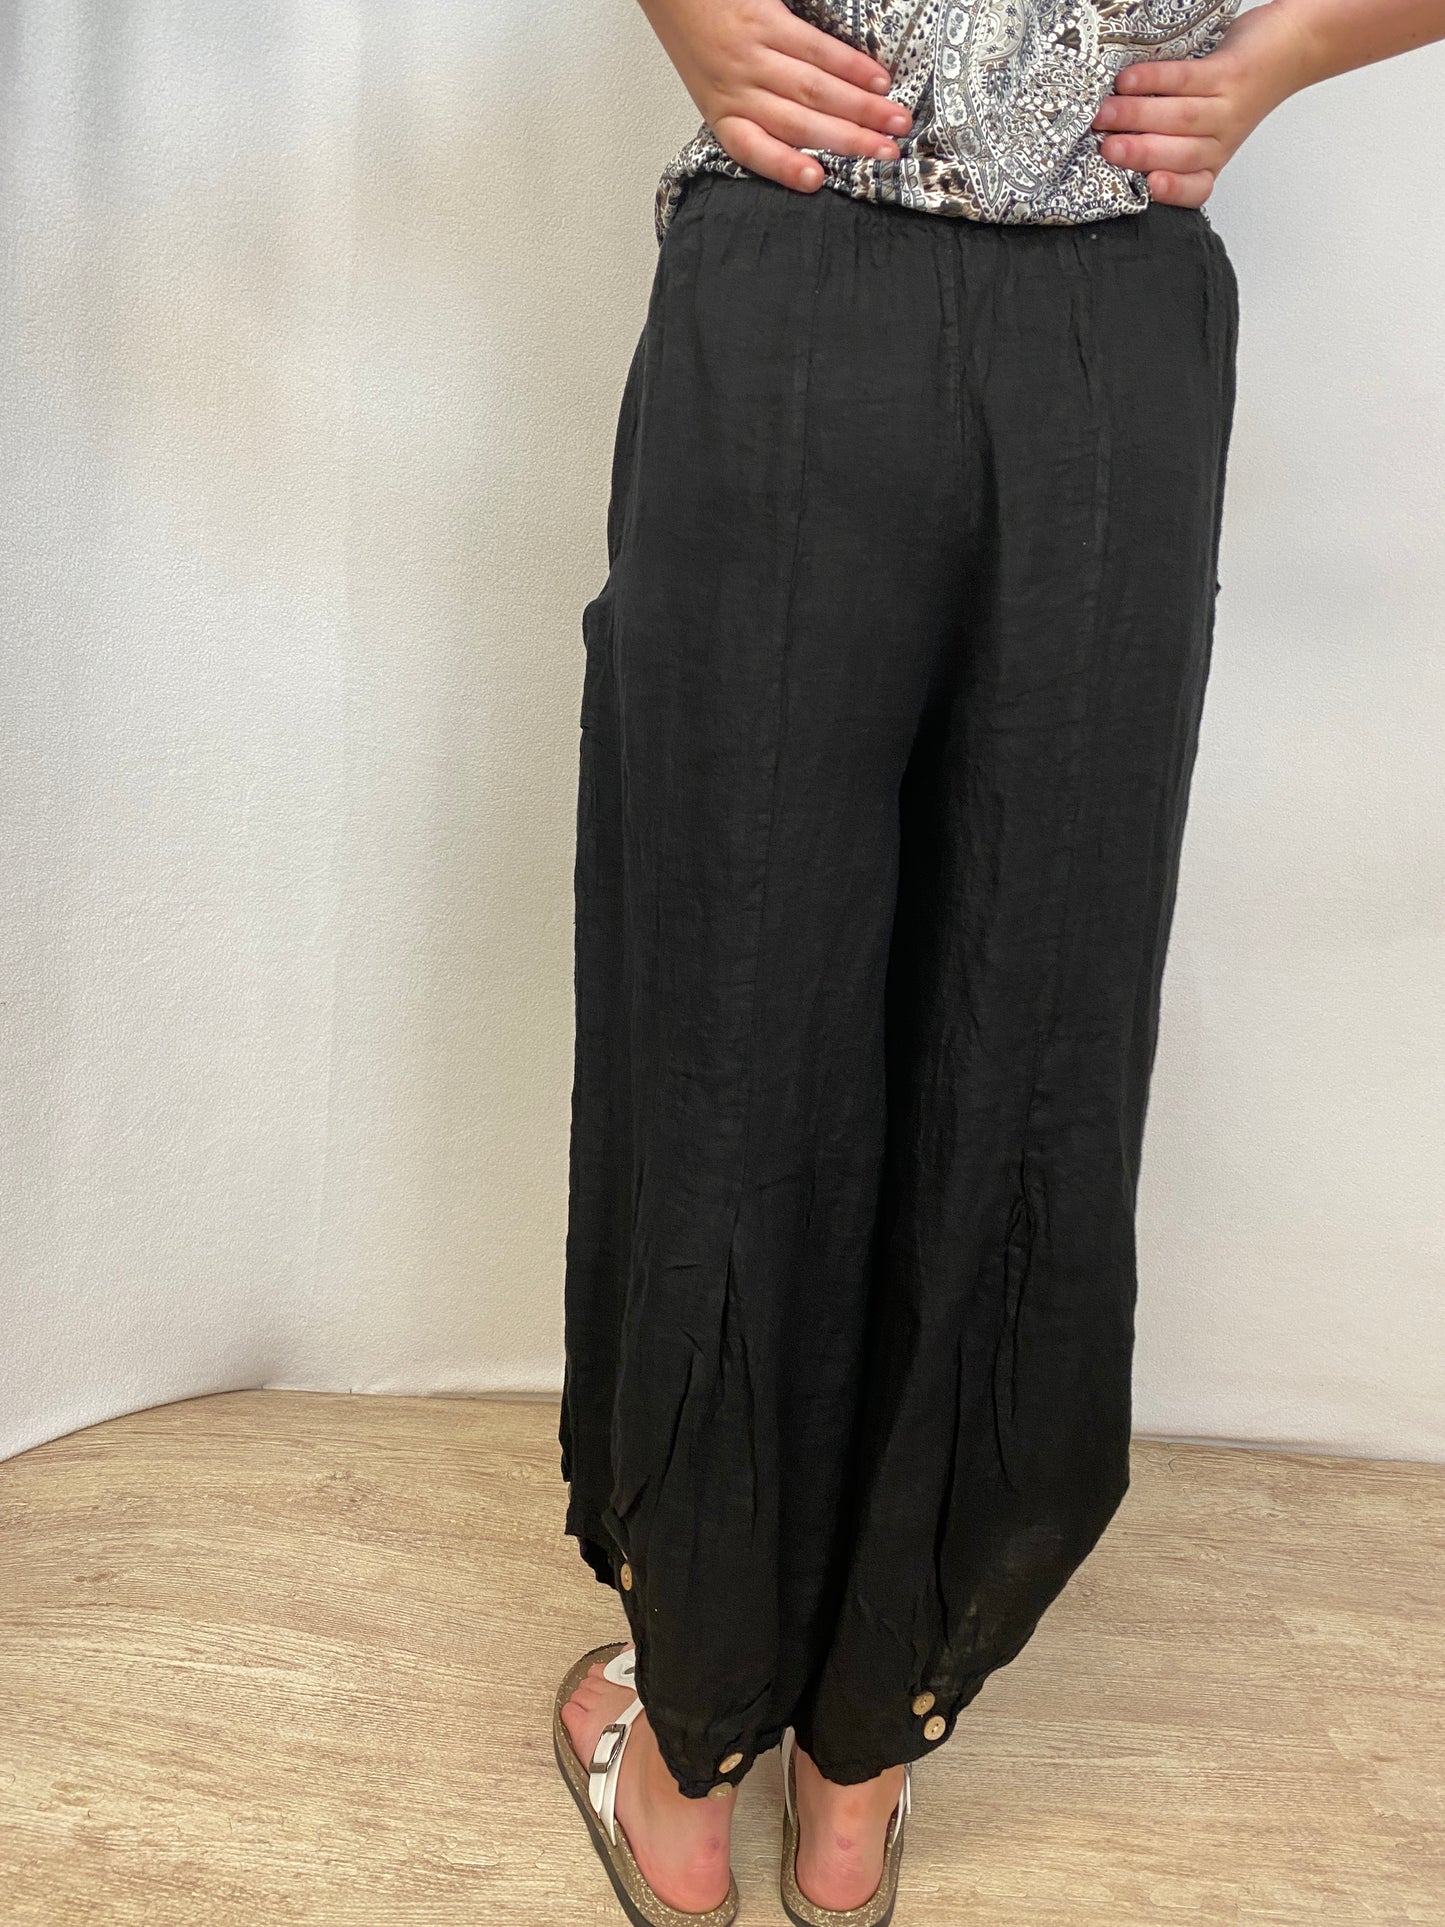 Italian, Linen Pants with button accent.